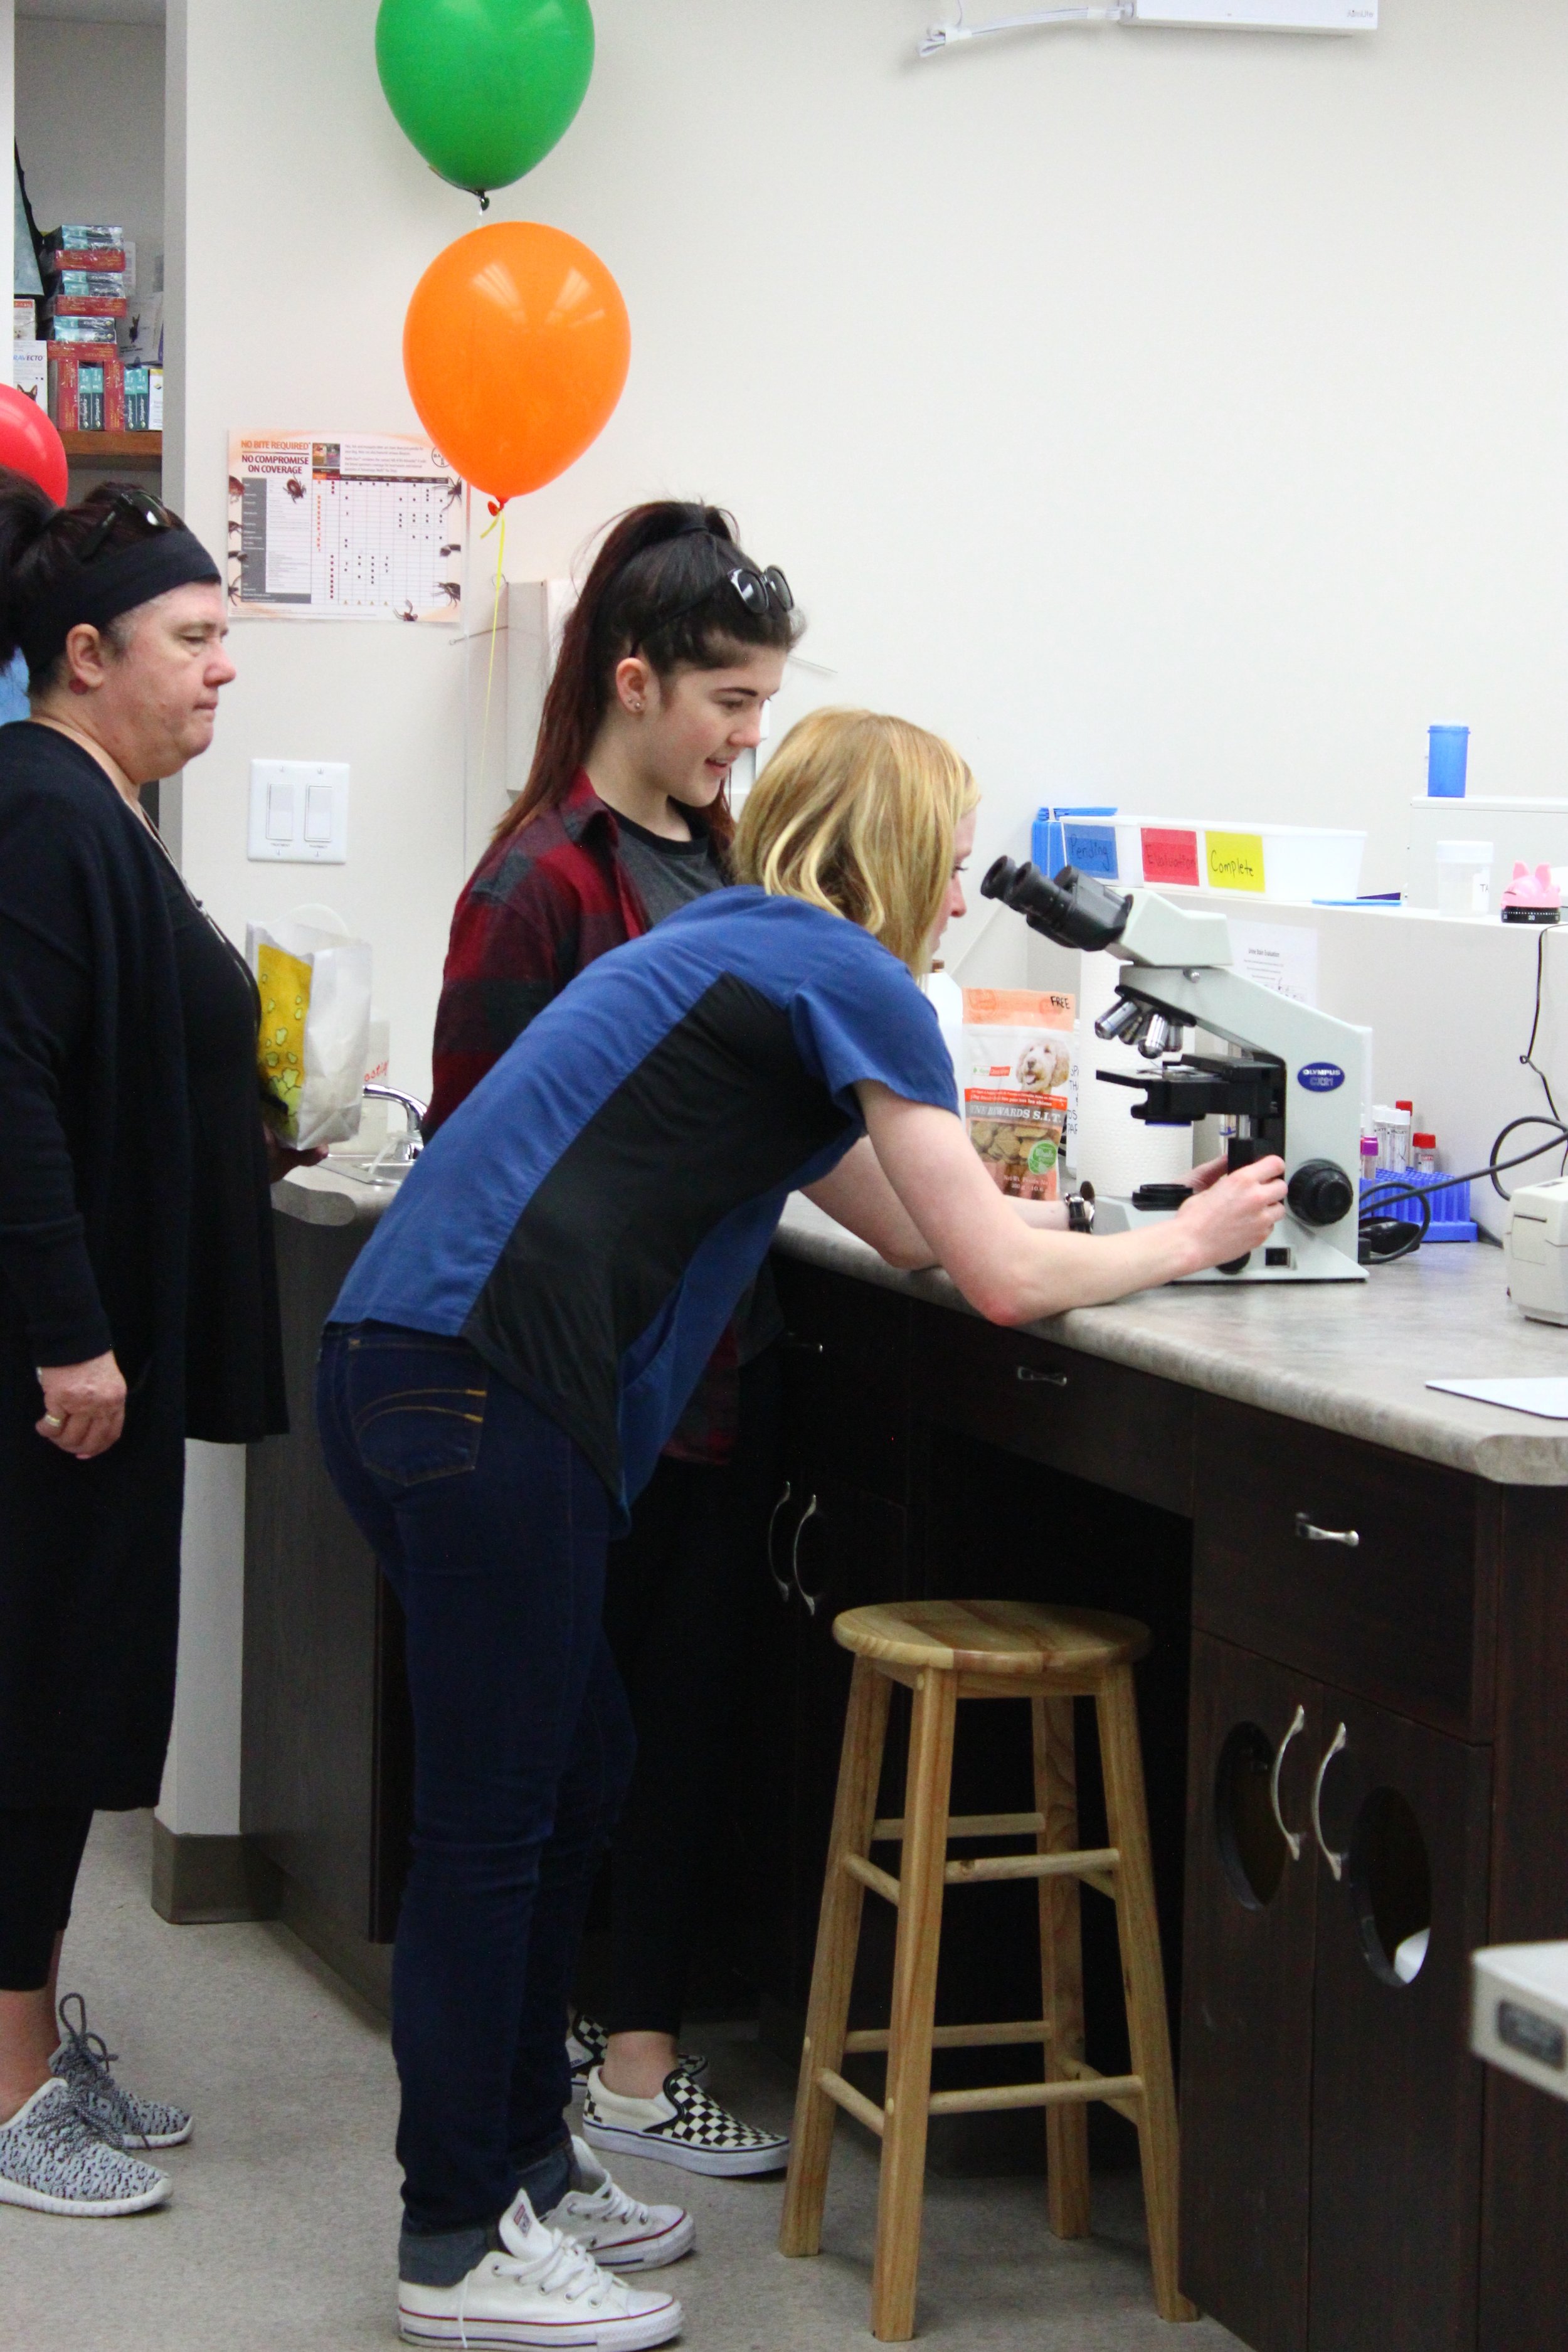 Our Registered Veterinary Technologist, Callie Showing Visitors Neat Slide's Under Our Microscope 